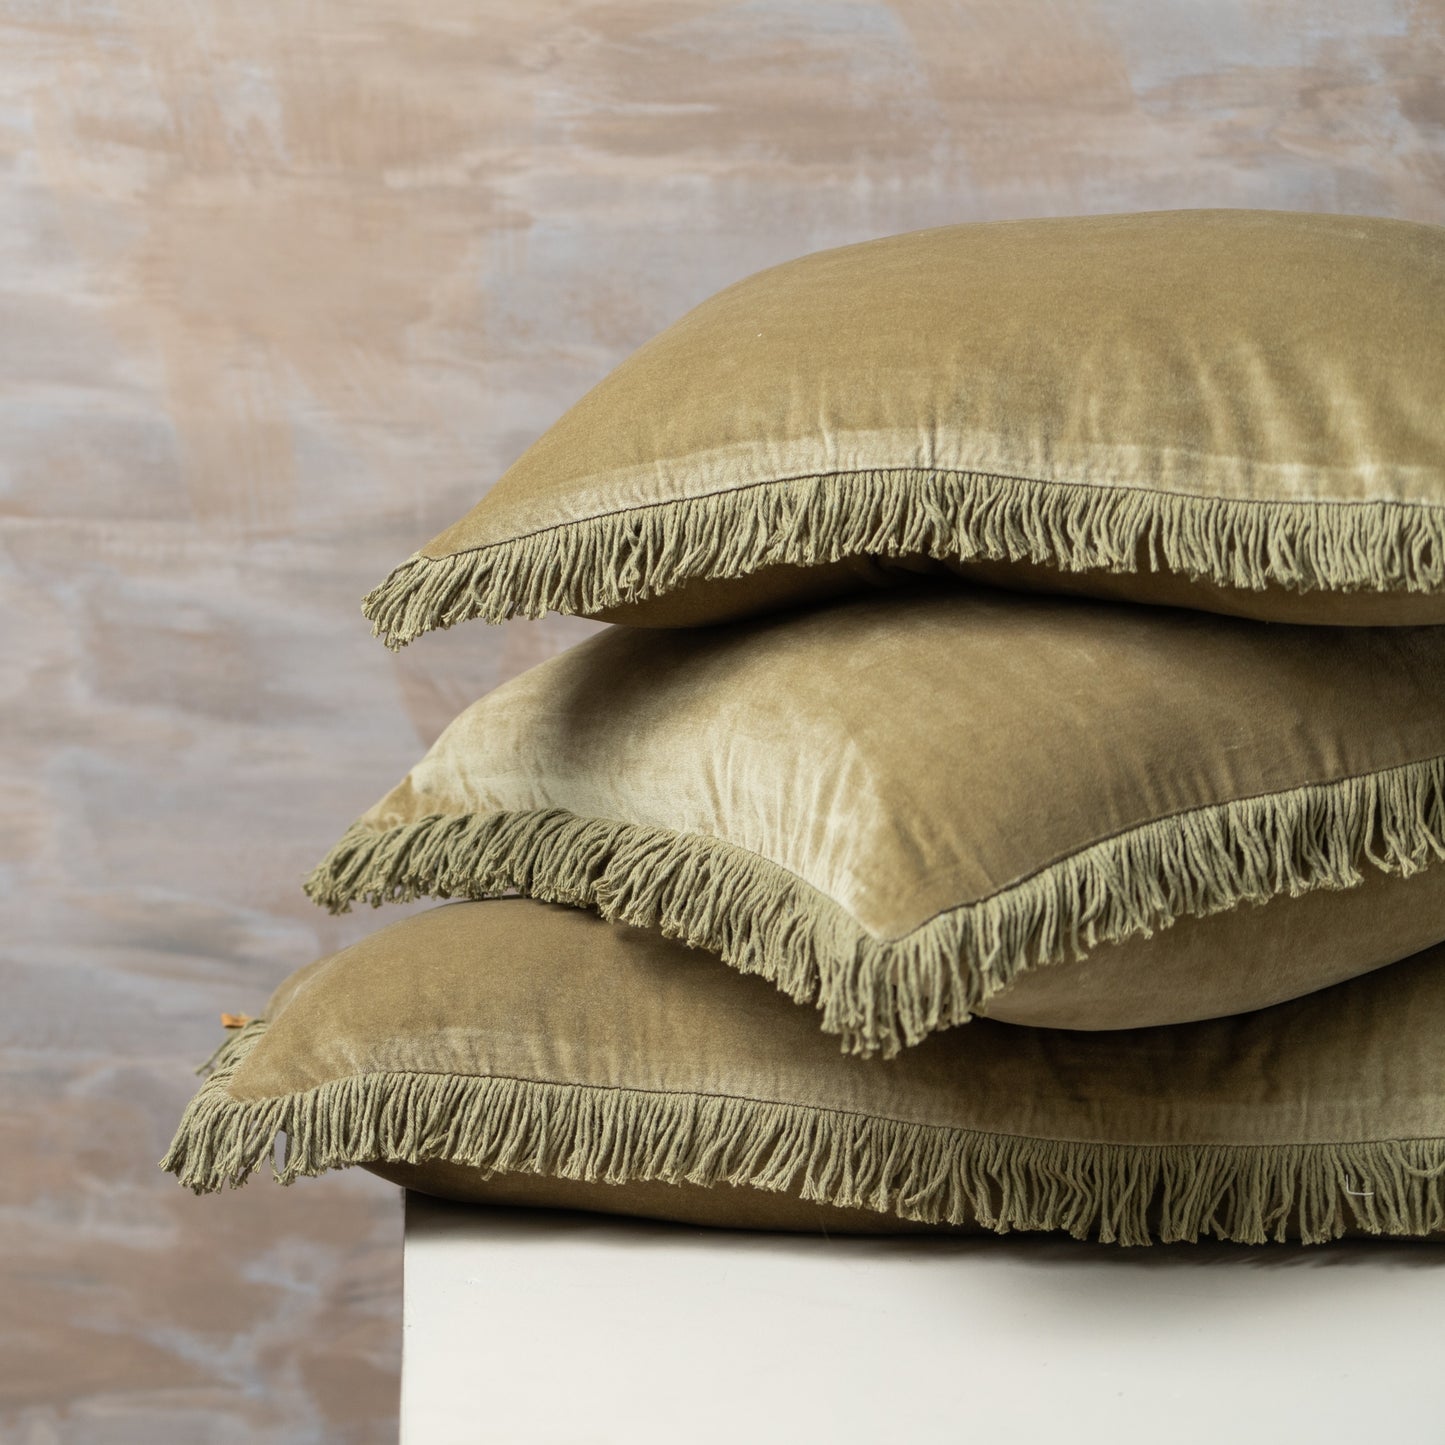 The Olive Velvet Bolster Cushion is the epitome of relaxed, retro styling. With super soft, with vintage wash tones and frayed edge detail, it adds an understated luxury to your room. Made with 100% cotton, measures 15.75" x 35.43".